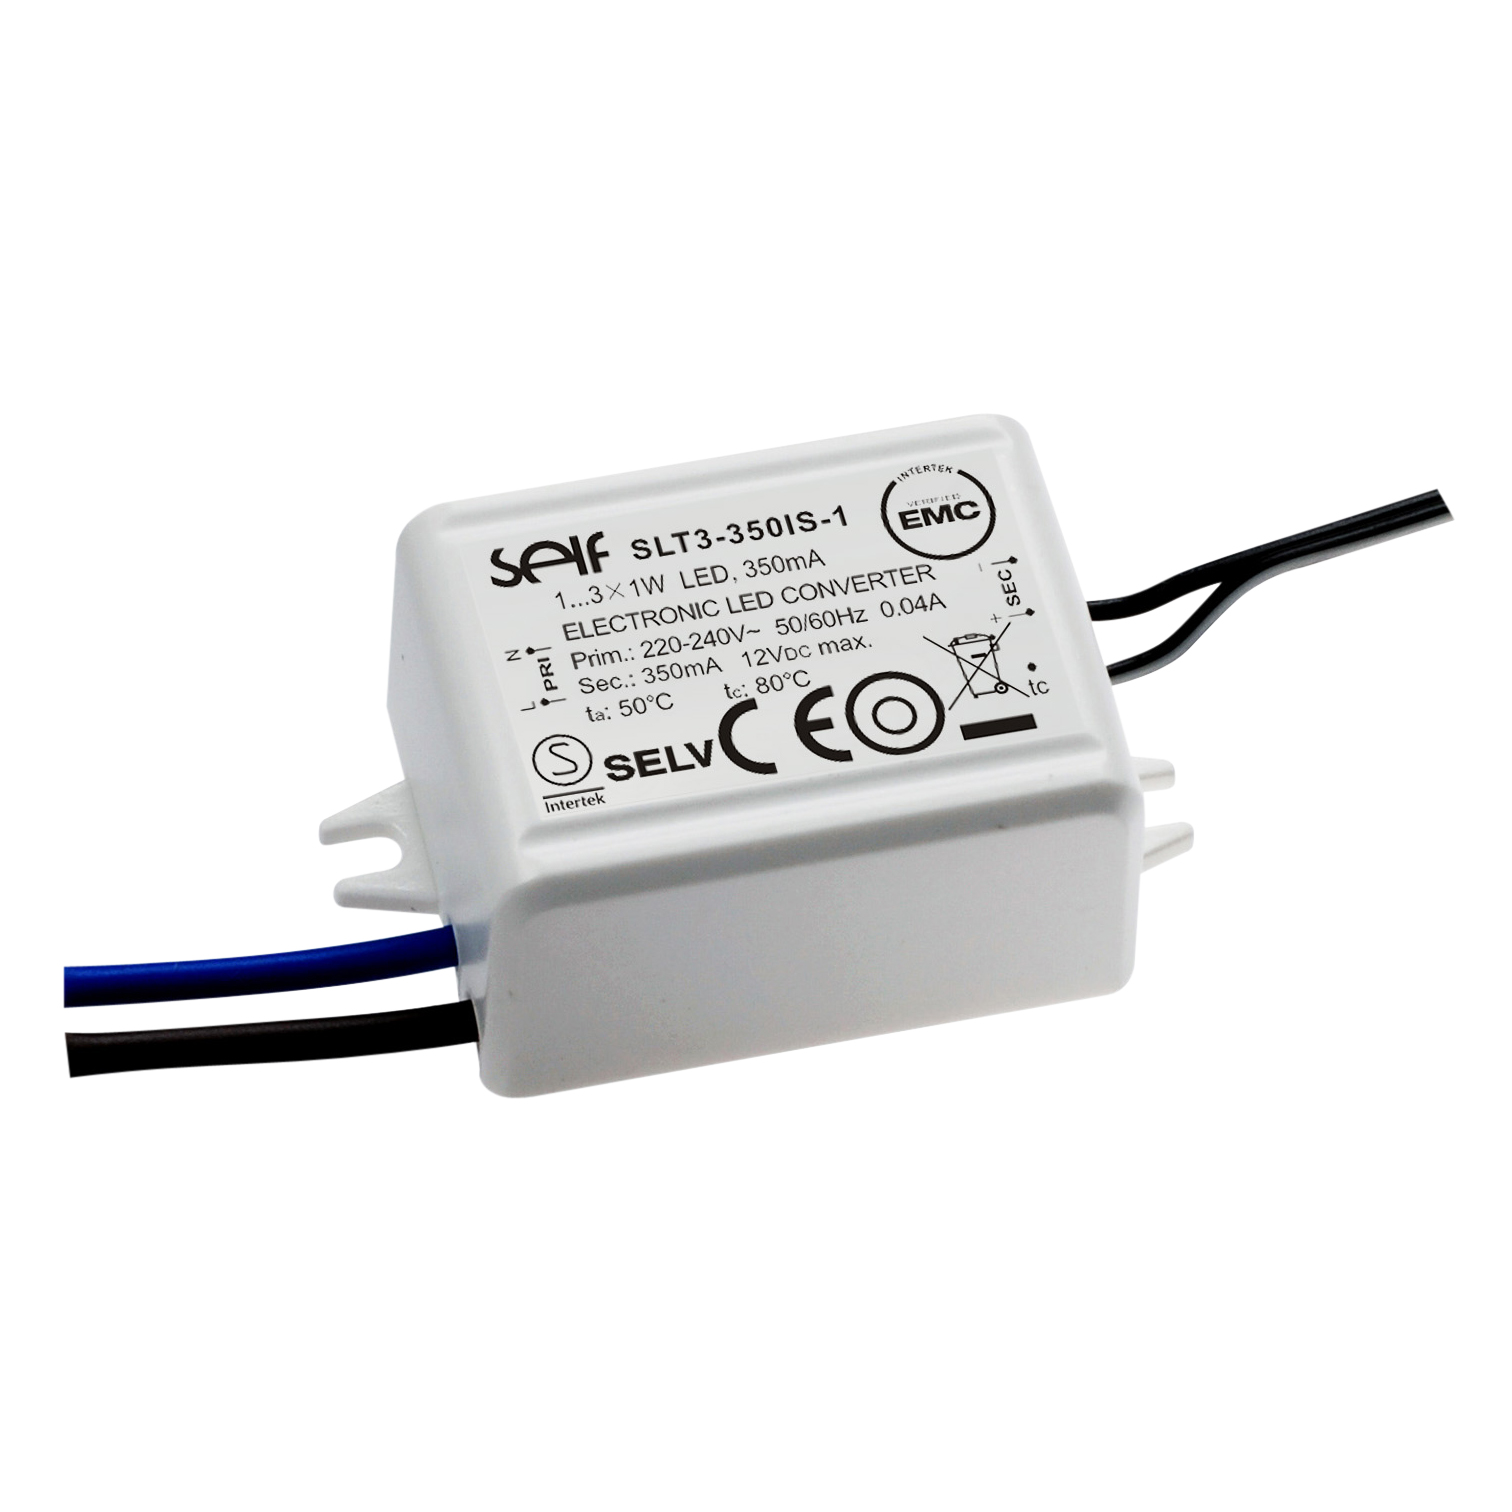 Self SLT3-700IS-1 (700 mA) constant current supply